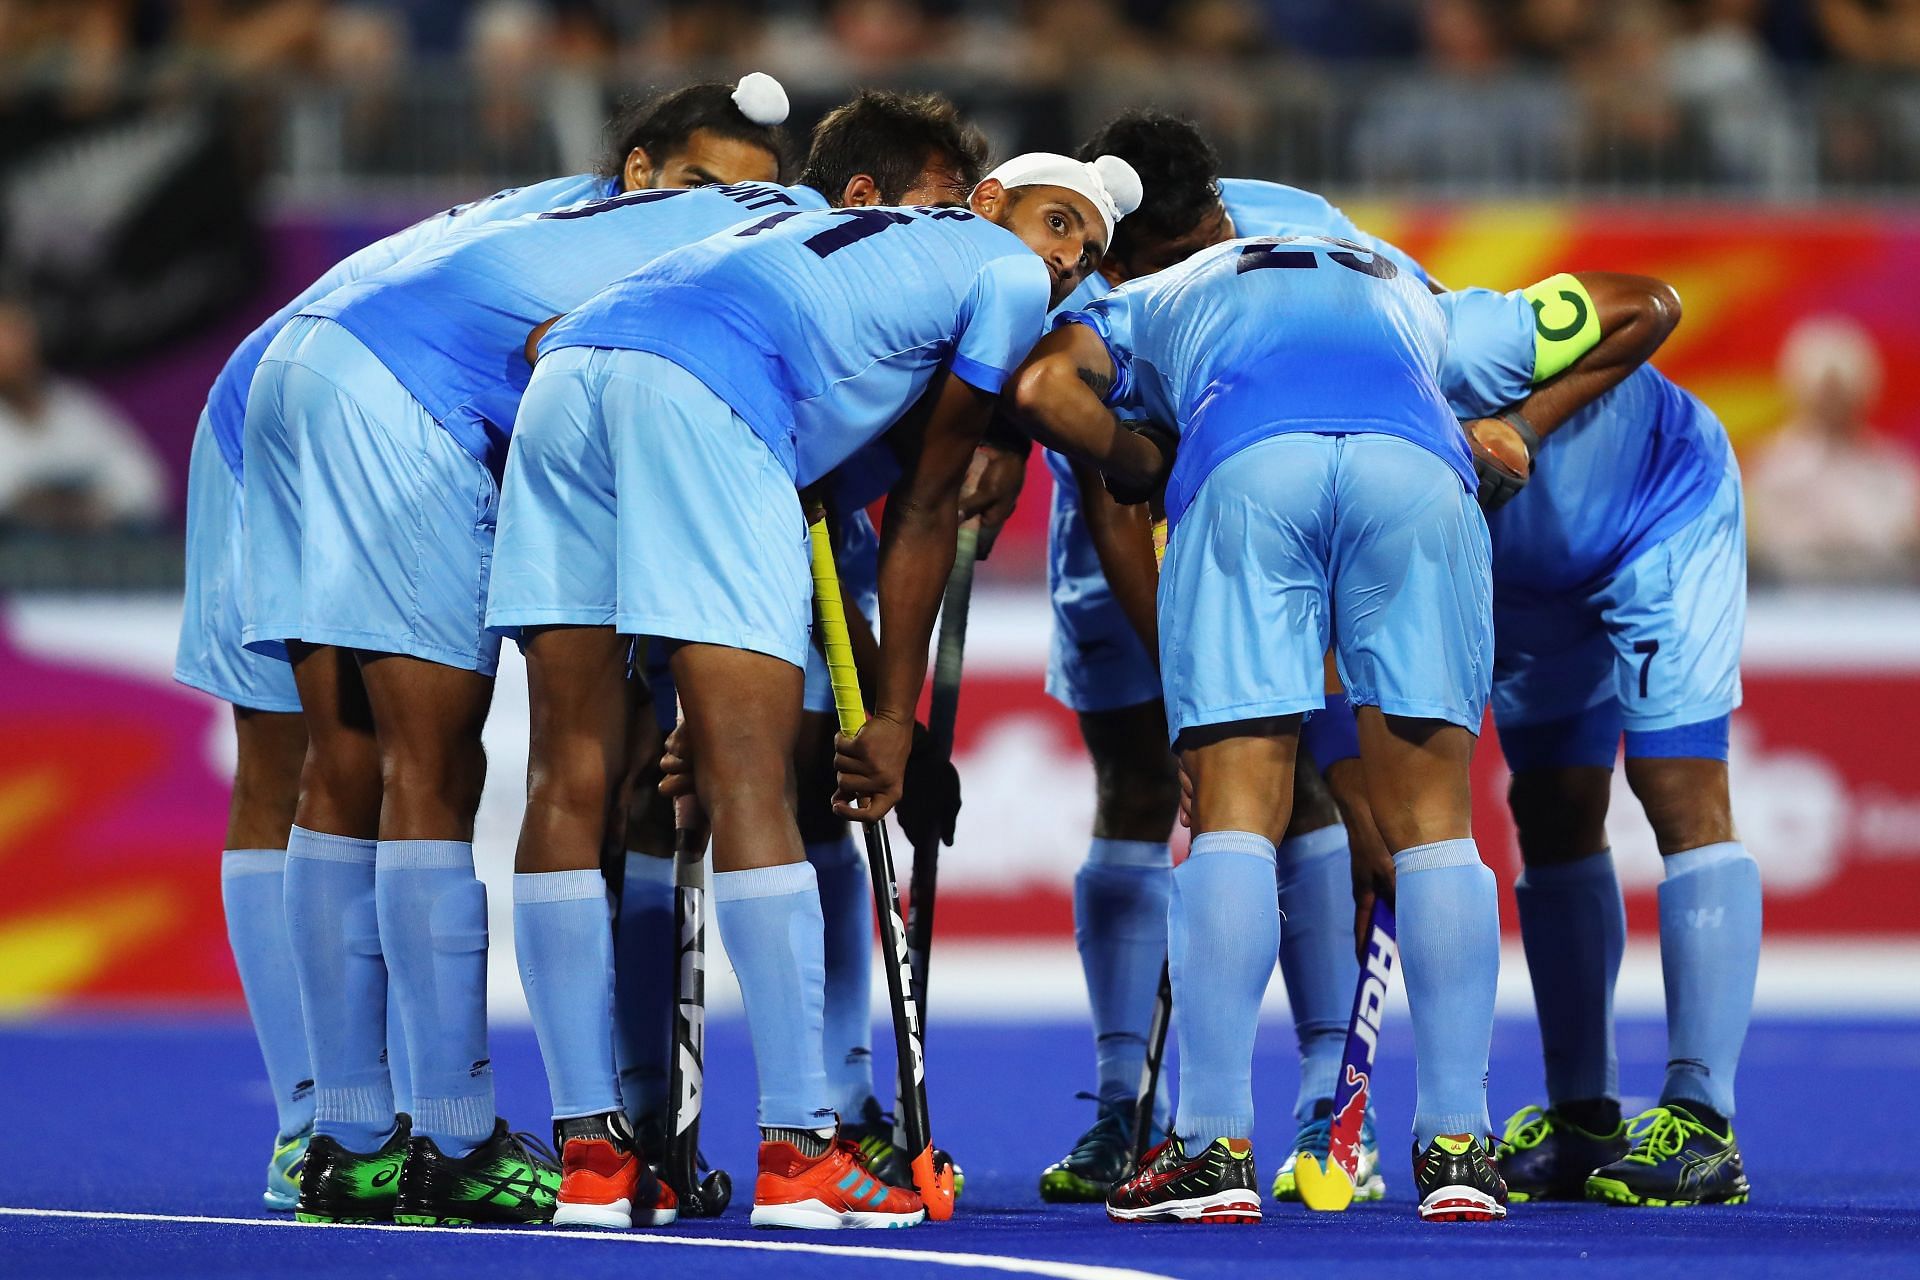 India have announced a full-strength squad for the CWG